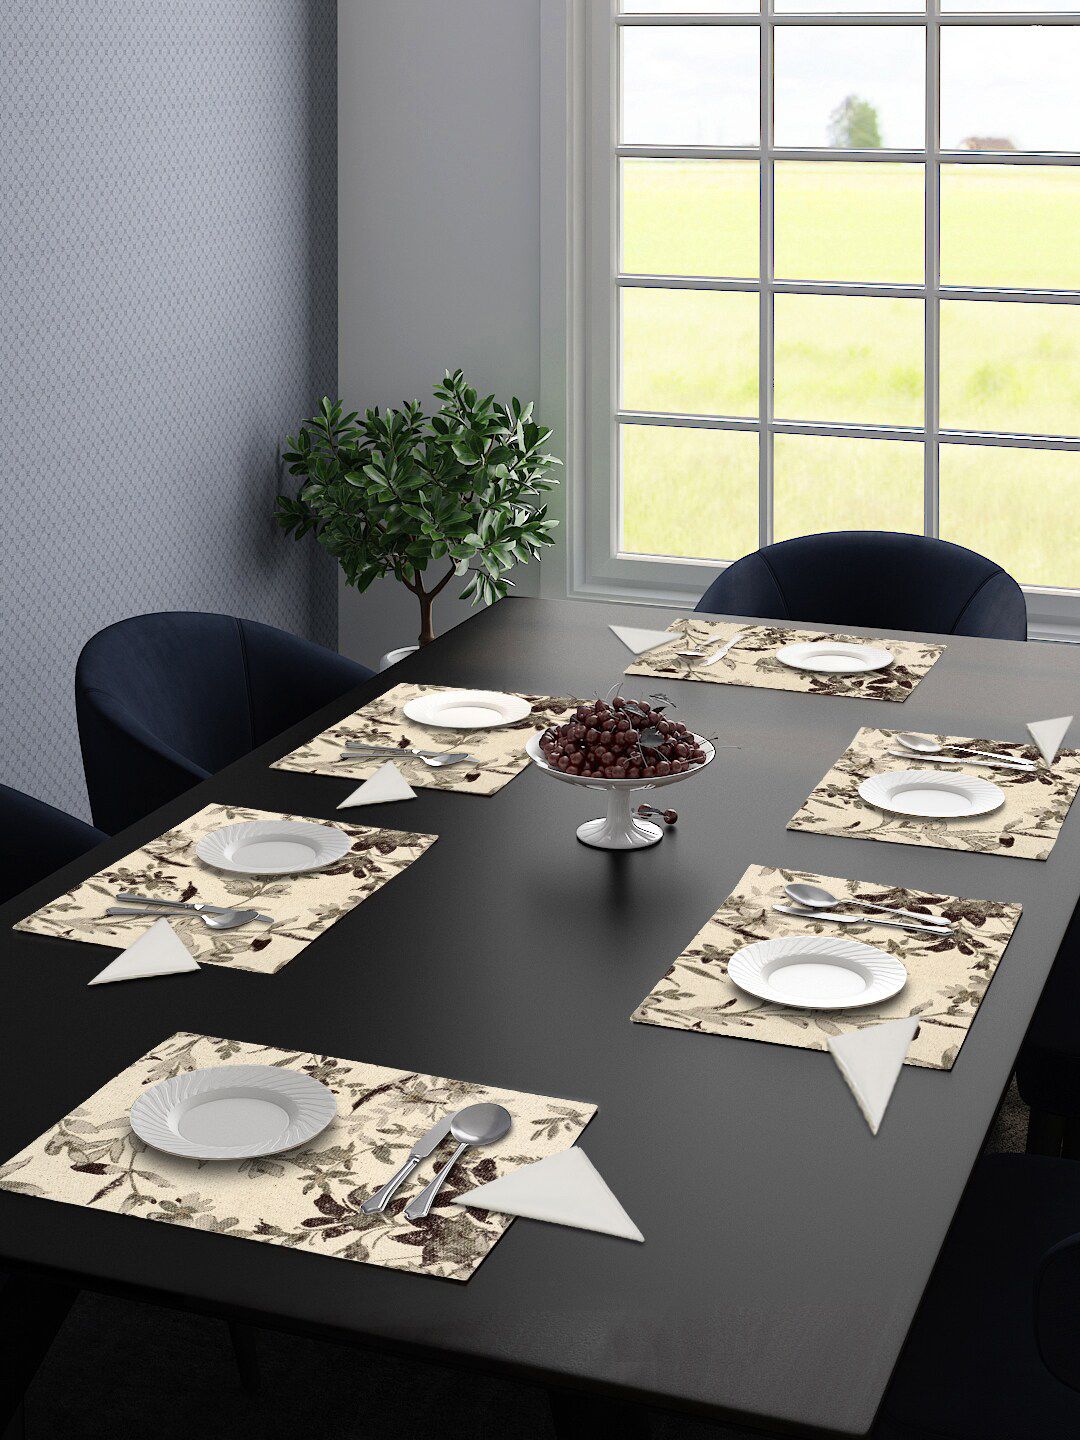 Saral Home Set Of 6 Grey Printed Rectangular Cotton Table Placemats Price in India